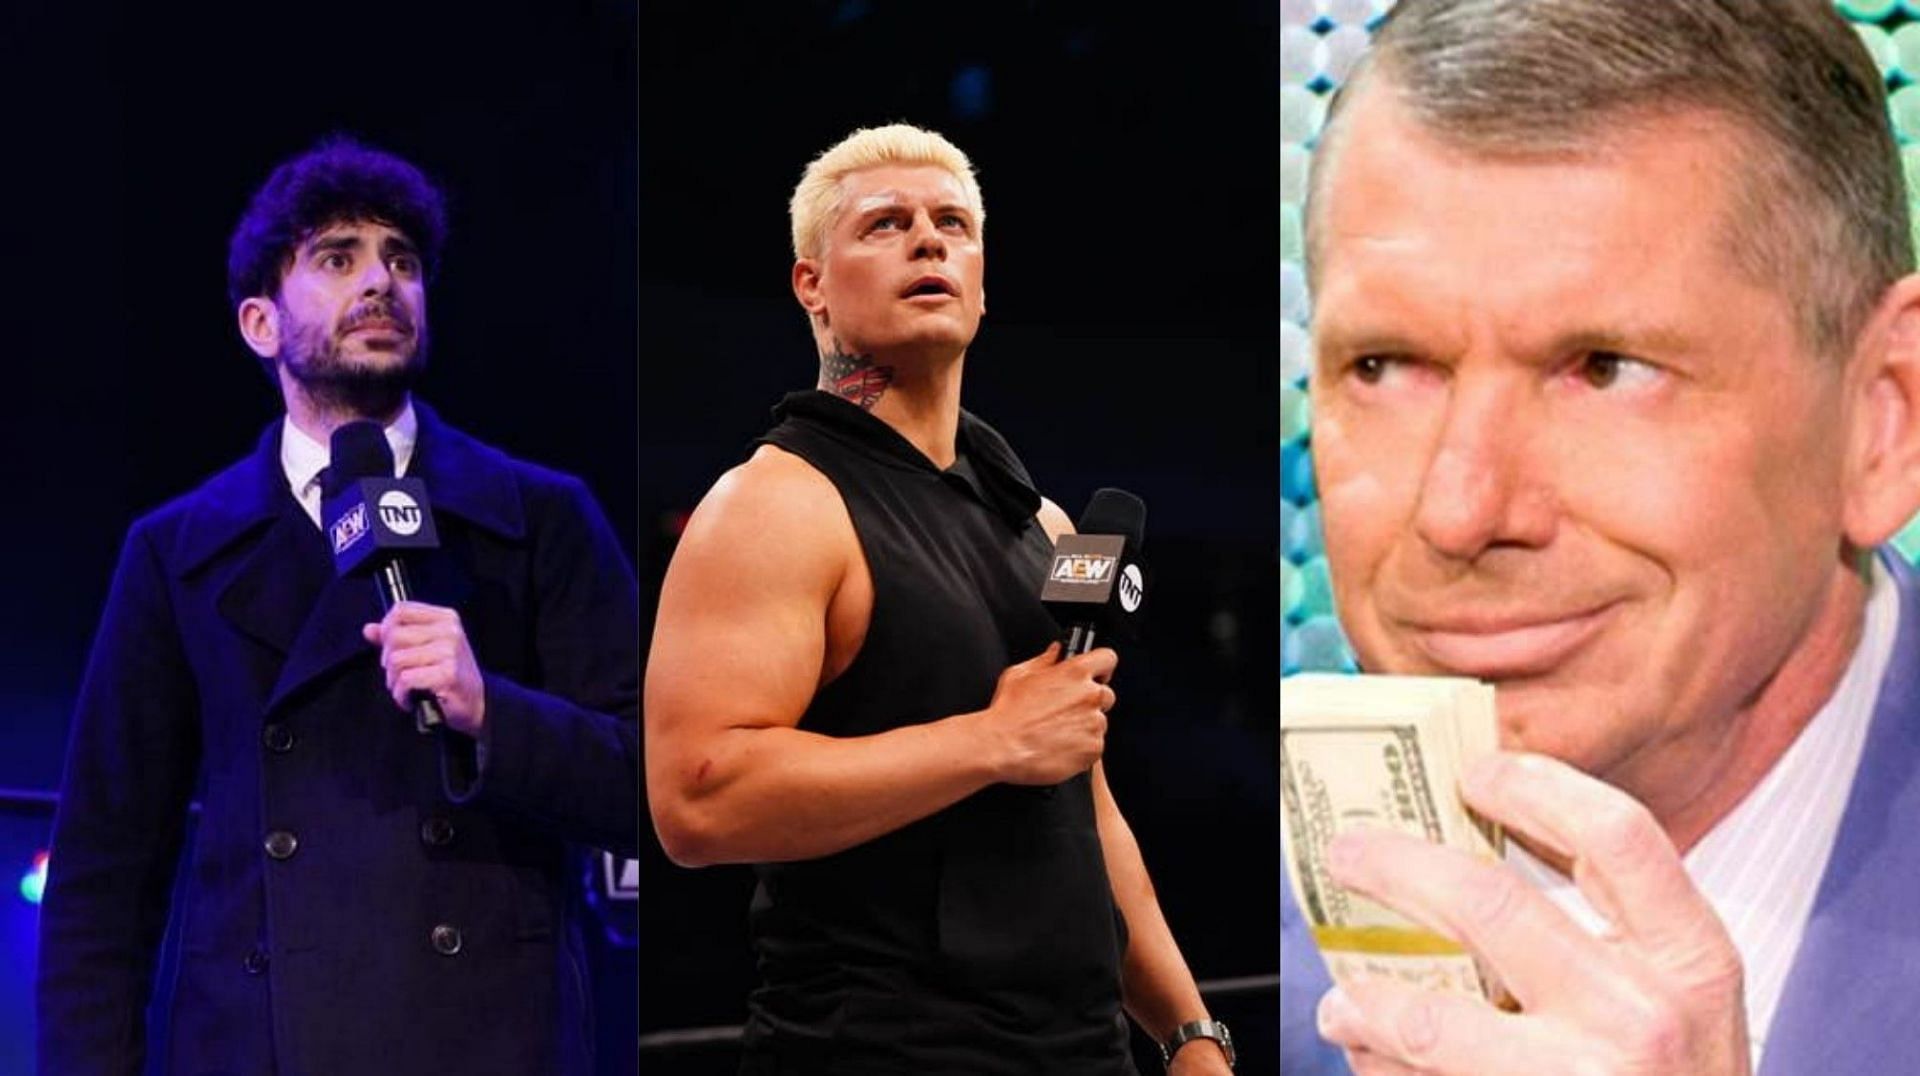 Did The American Nightmare leave AEW for WWE?